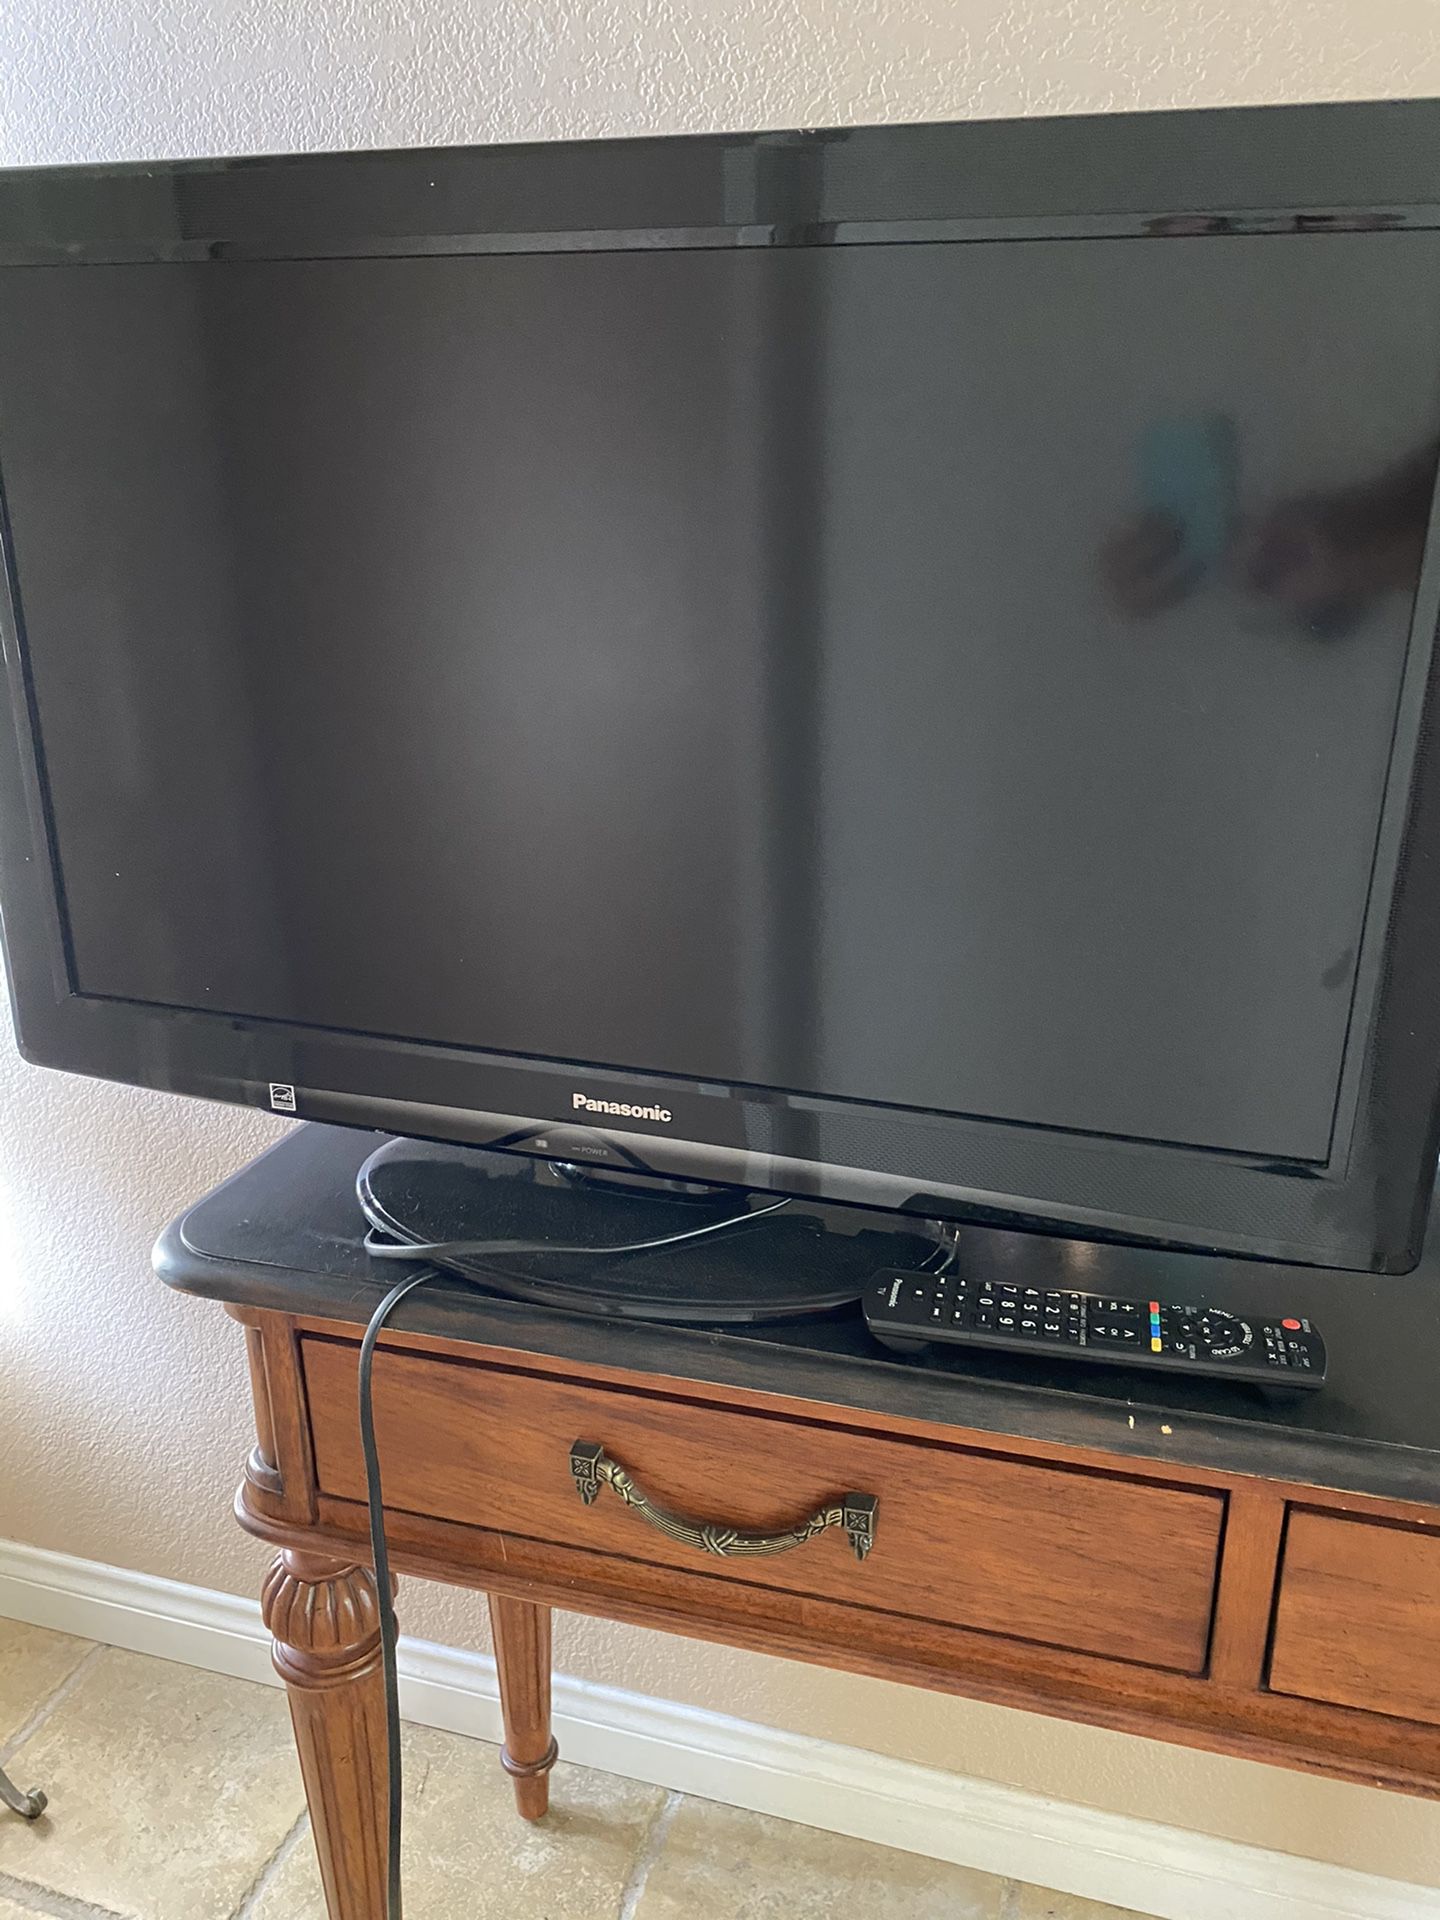 32 in Panasonic Tv With Remote